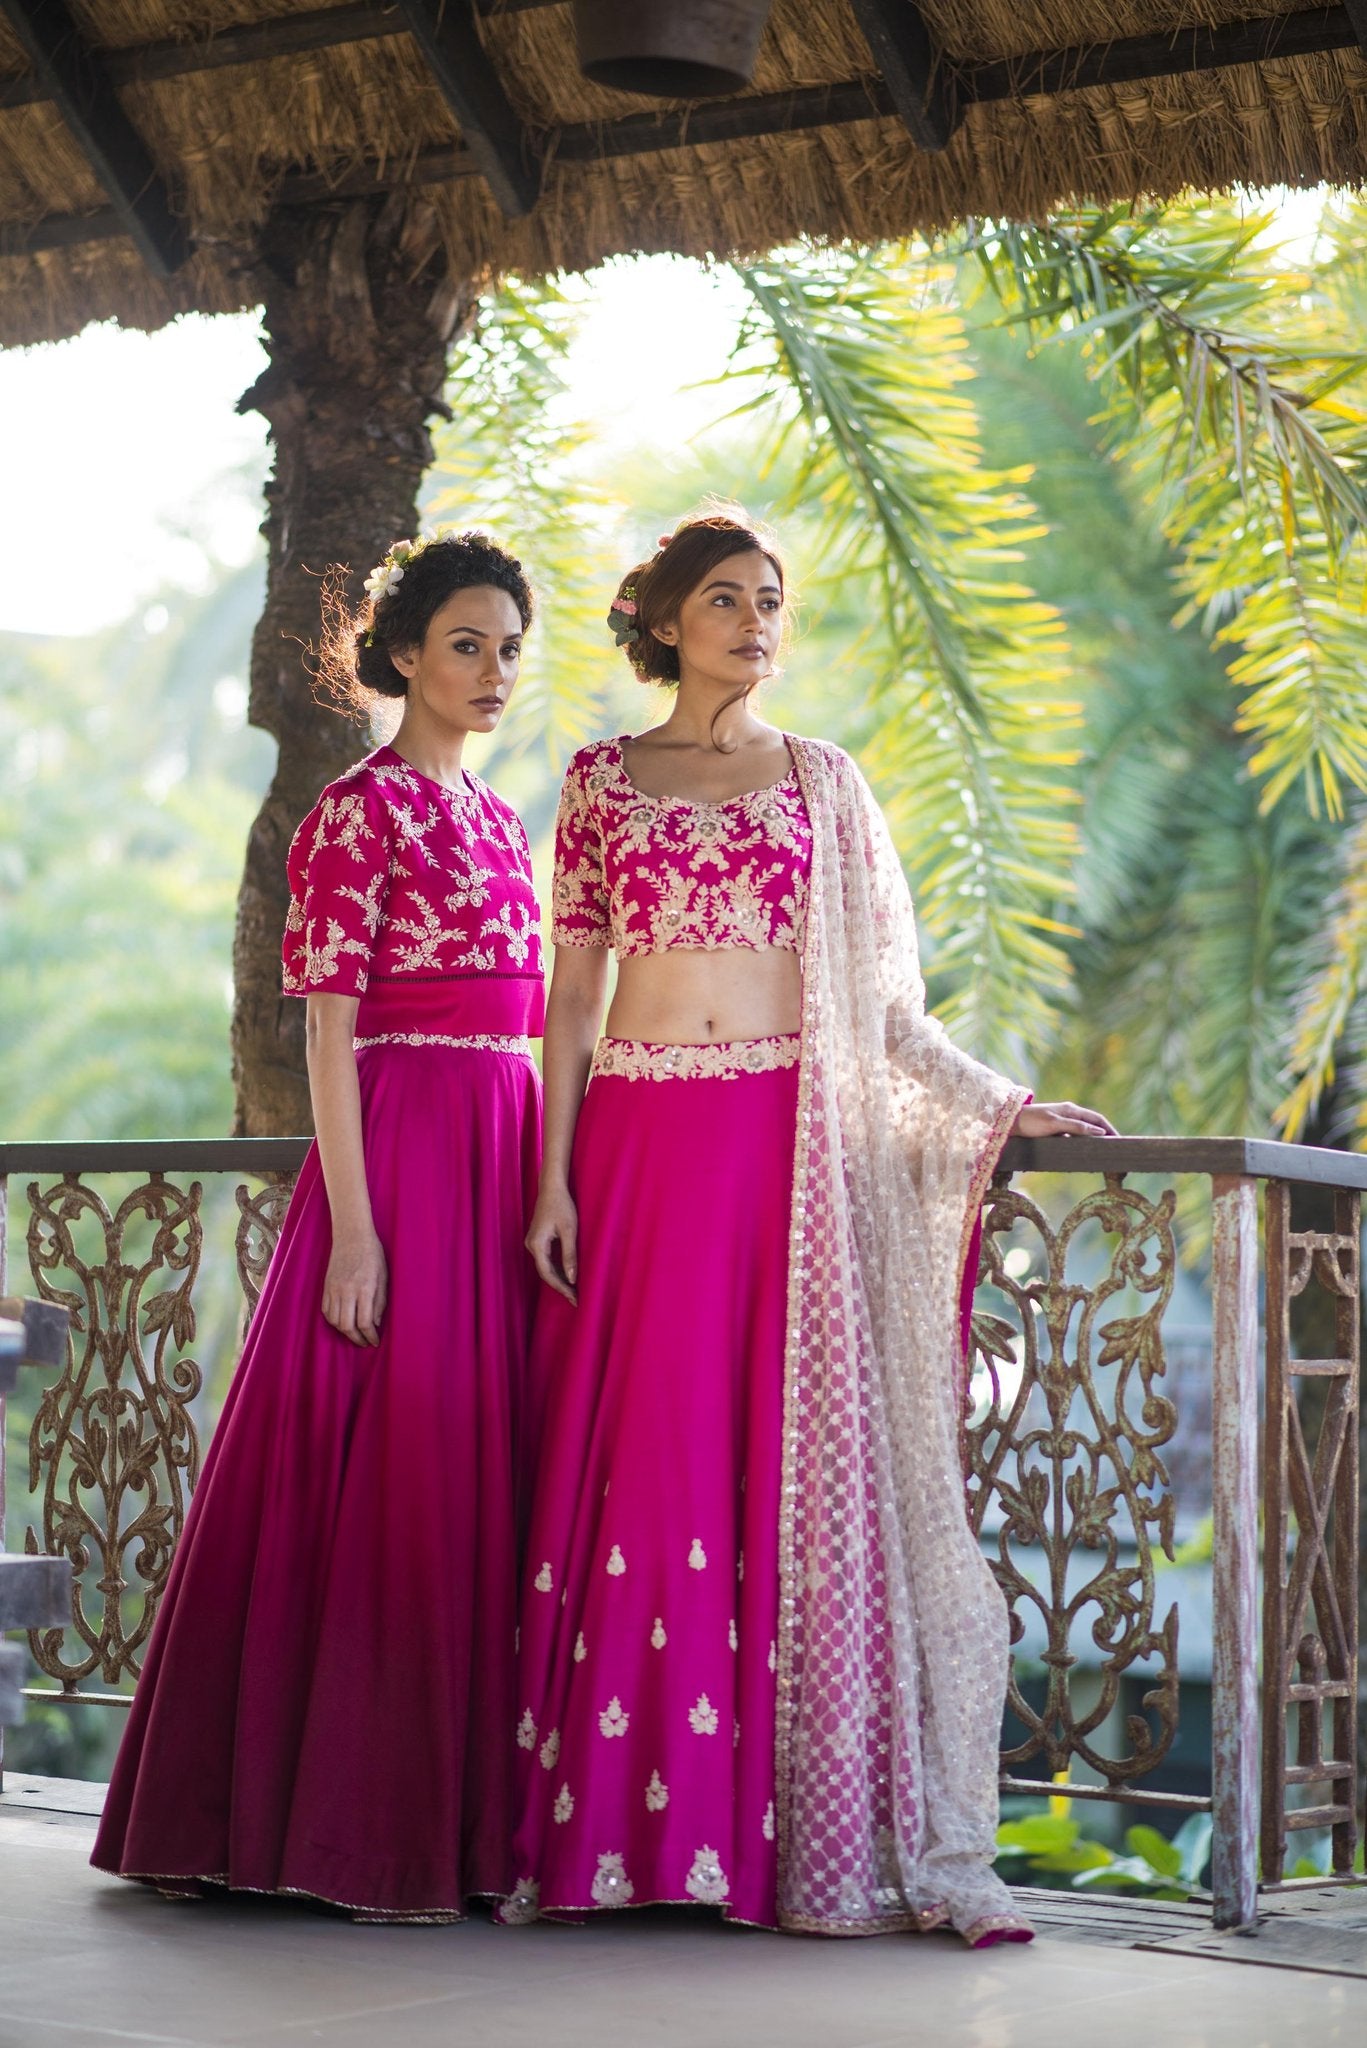 30+ Different Shades Of Pink We Spotted In Bridal Lehengas! | Pink bridal  lehenga, Bridal lehenga images, Pink bridal